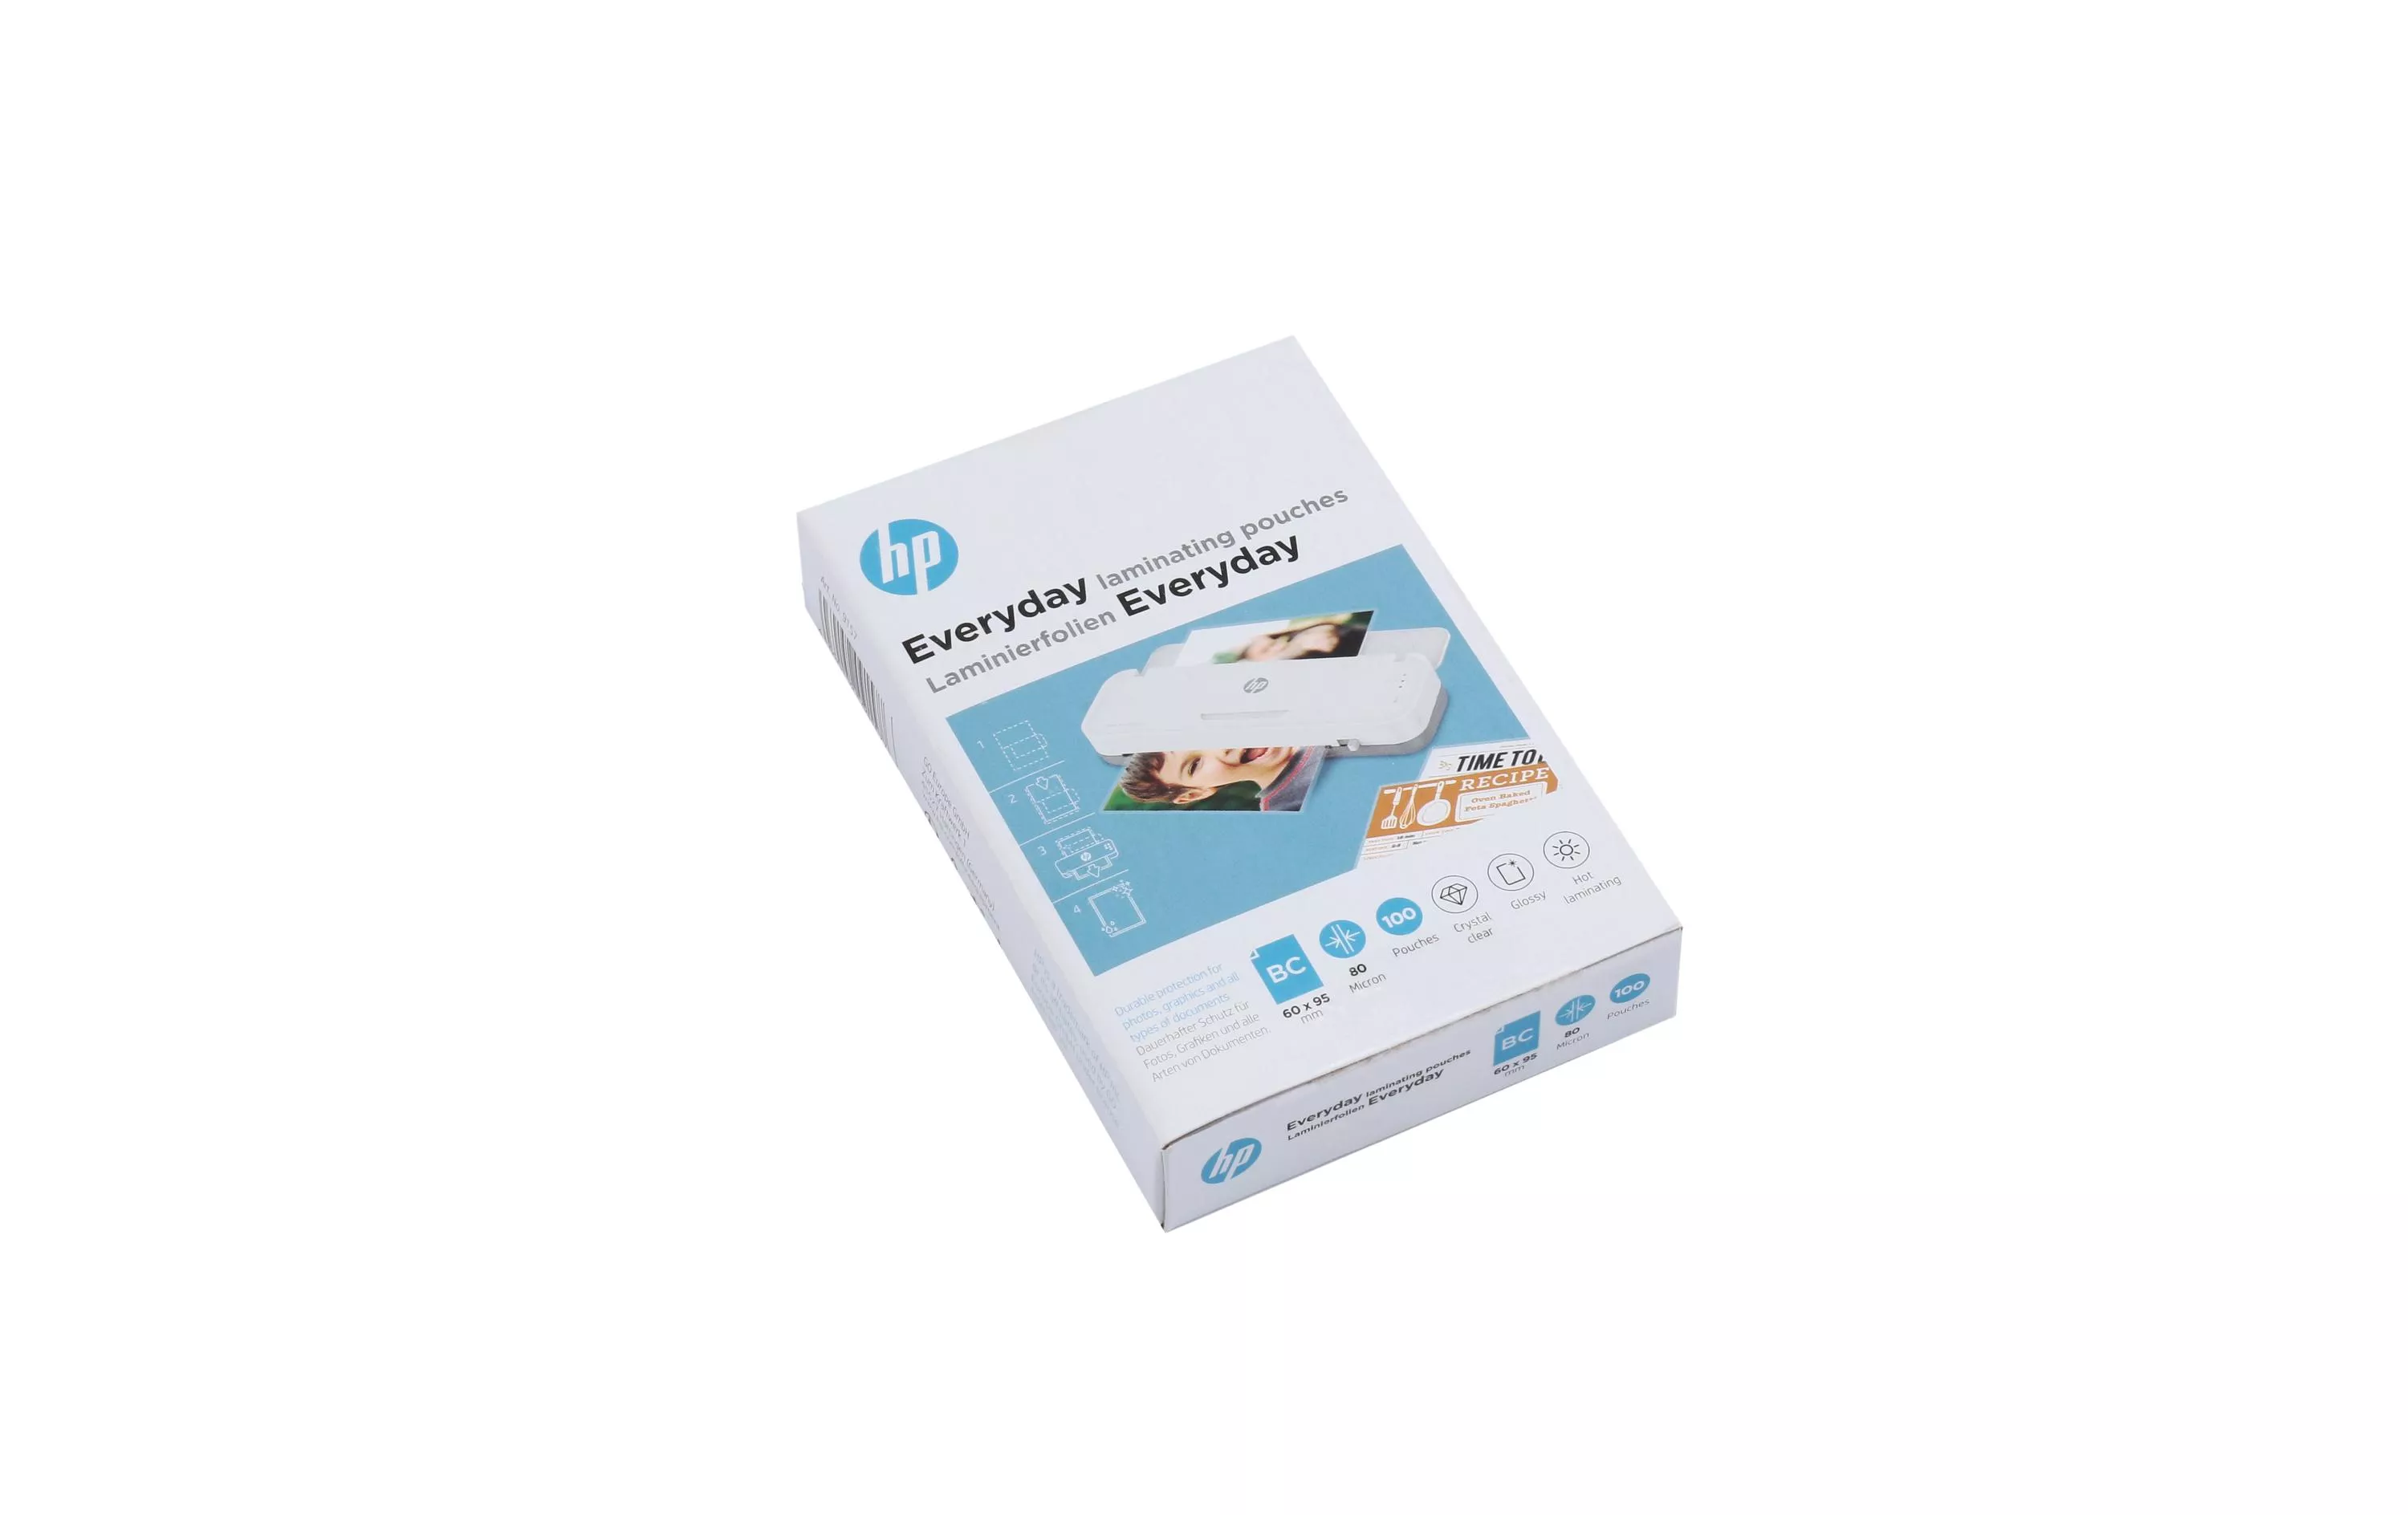 Laminating Film Everyday Business Cards 80 µm, Glossy